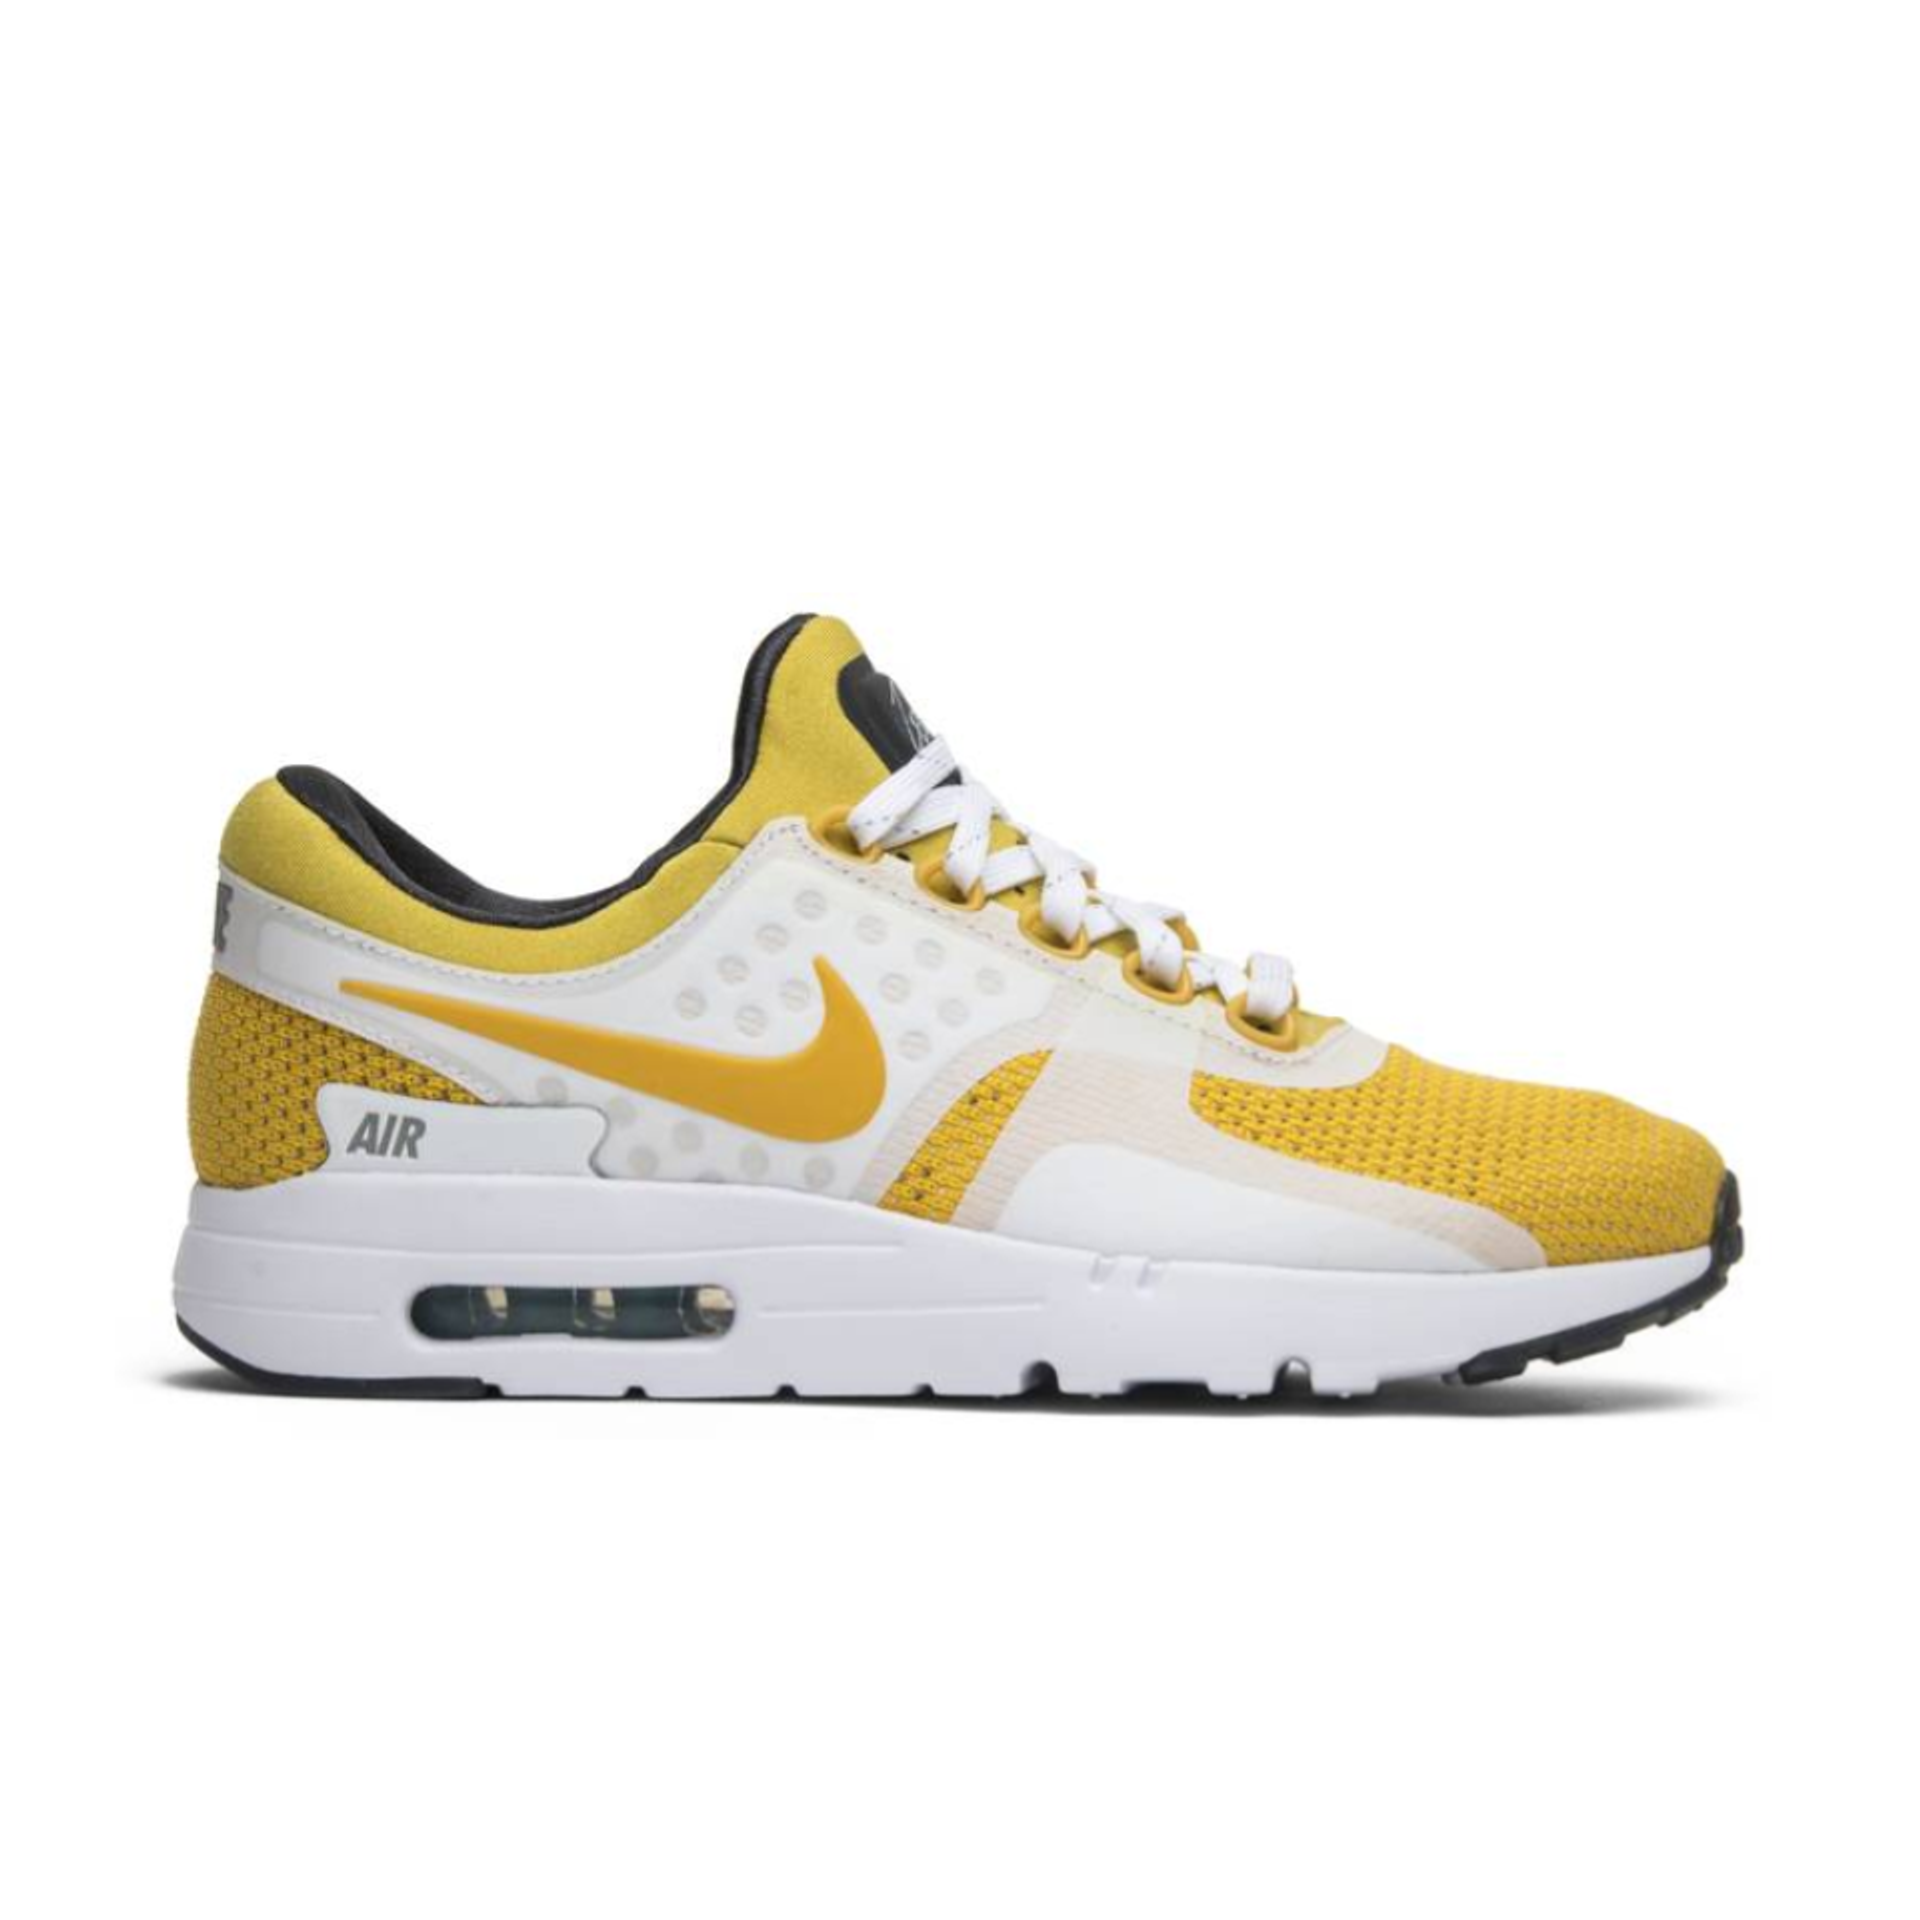 Buy & Sell Authentic Nike Air Max Air Max 0 Sneakers Online | Ox Street